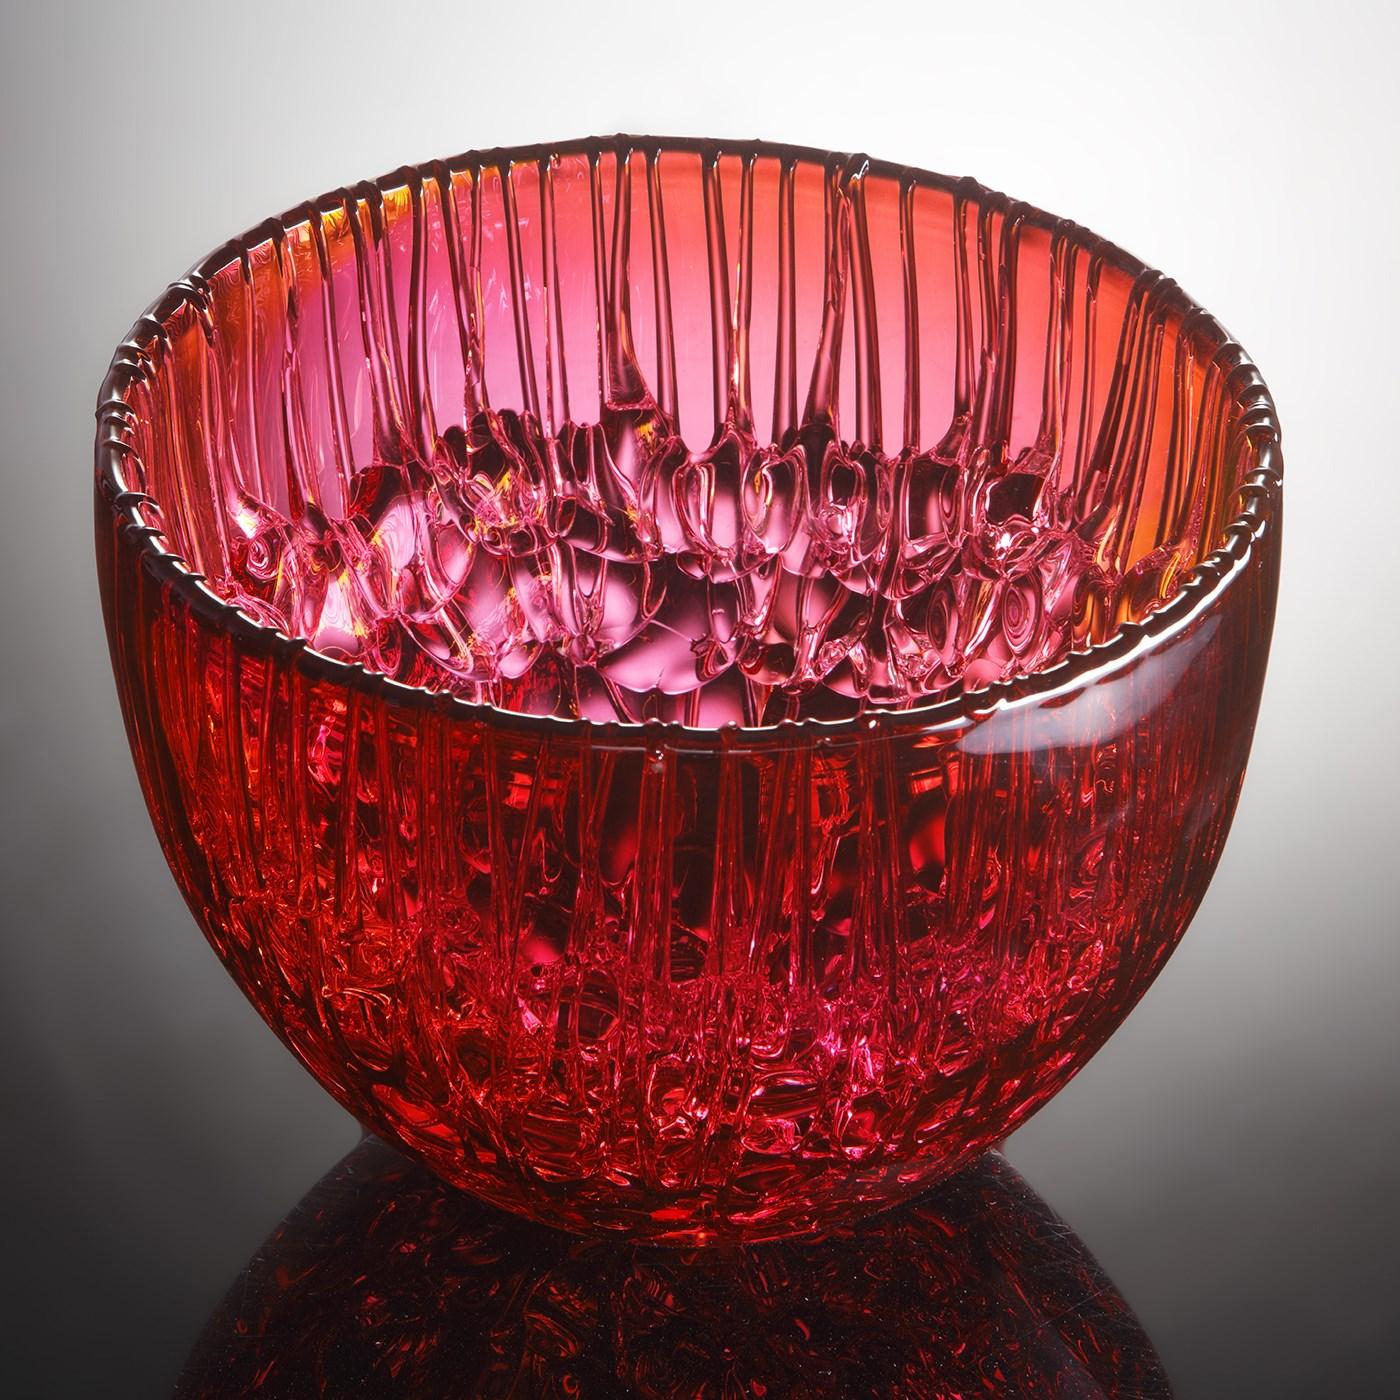 Cassito in Fuchsia & Gold, a Glass Bowl & Centrepiece by Katherine Huskie 5